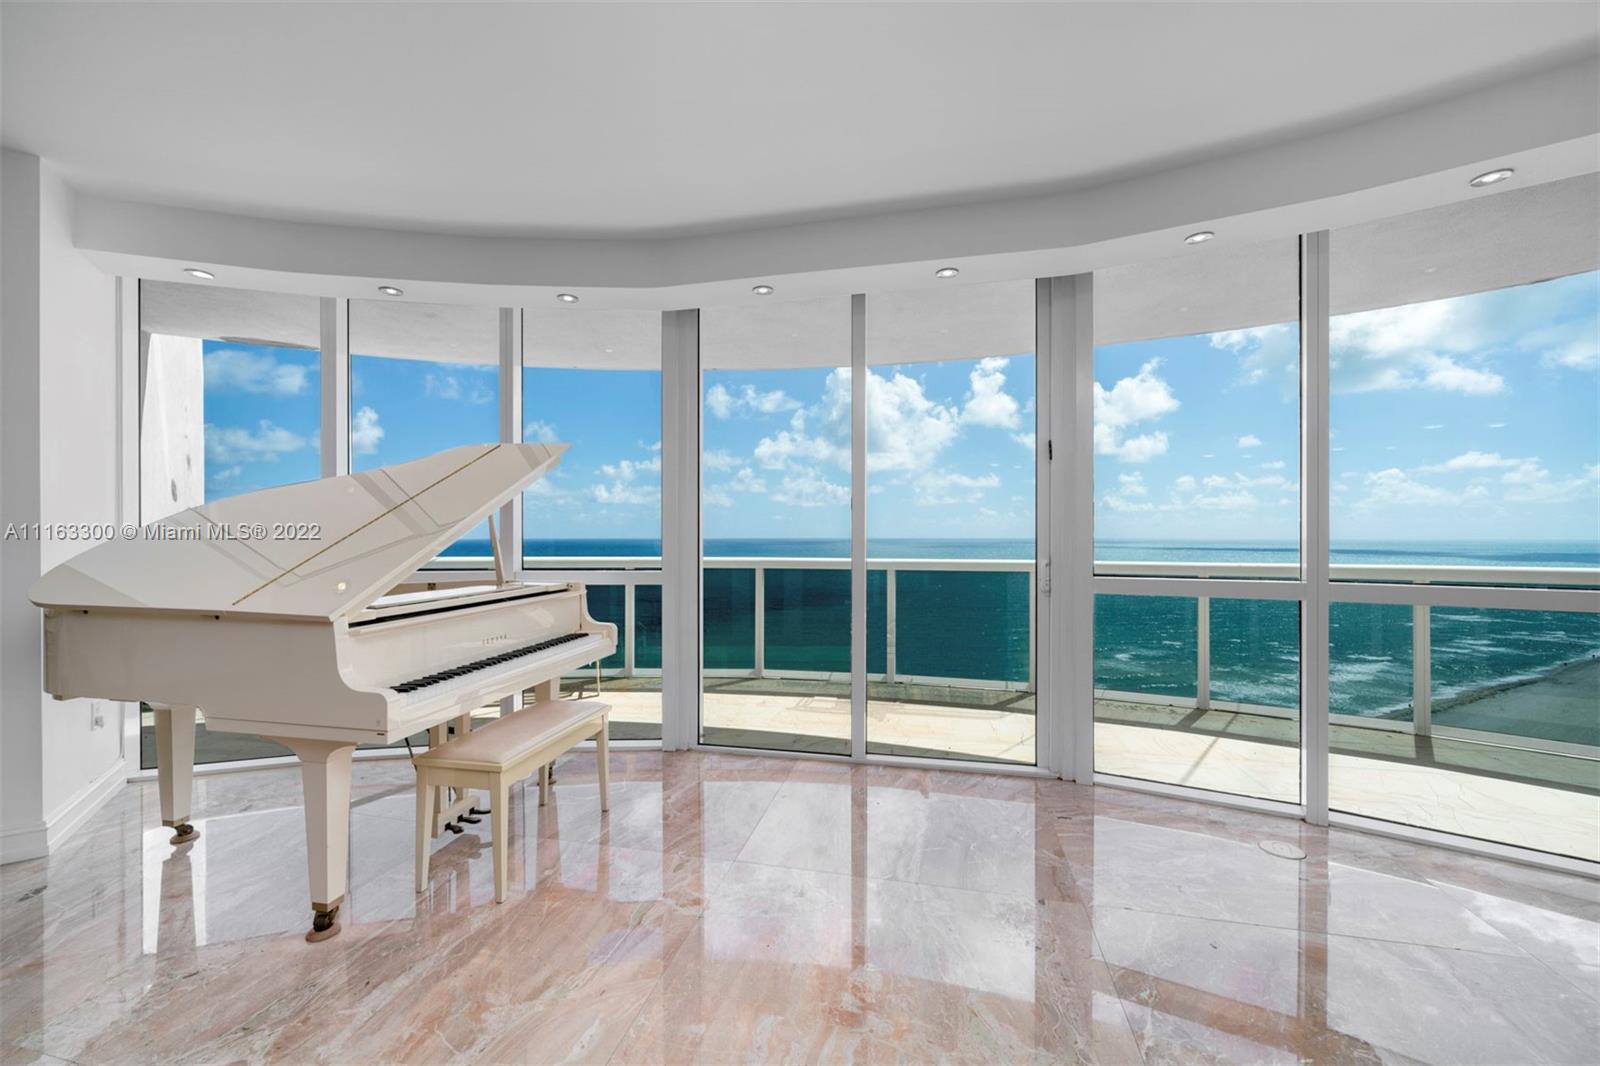 18201  Collins Ave #2009 For Sale A11163300, FL